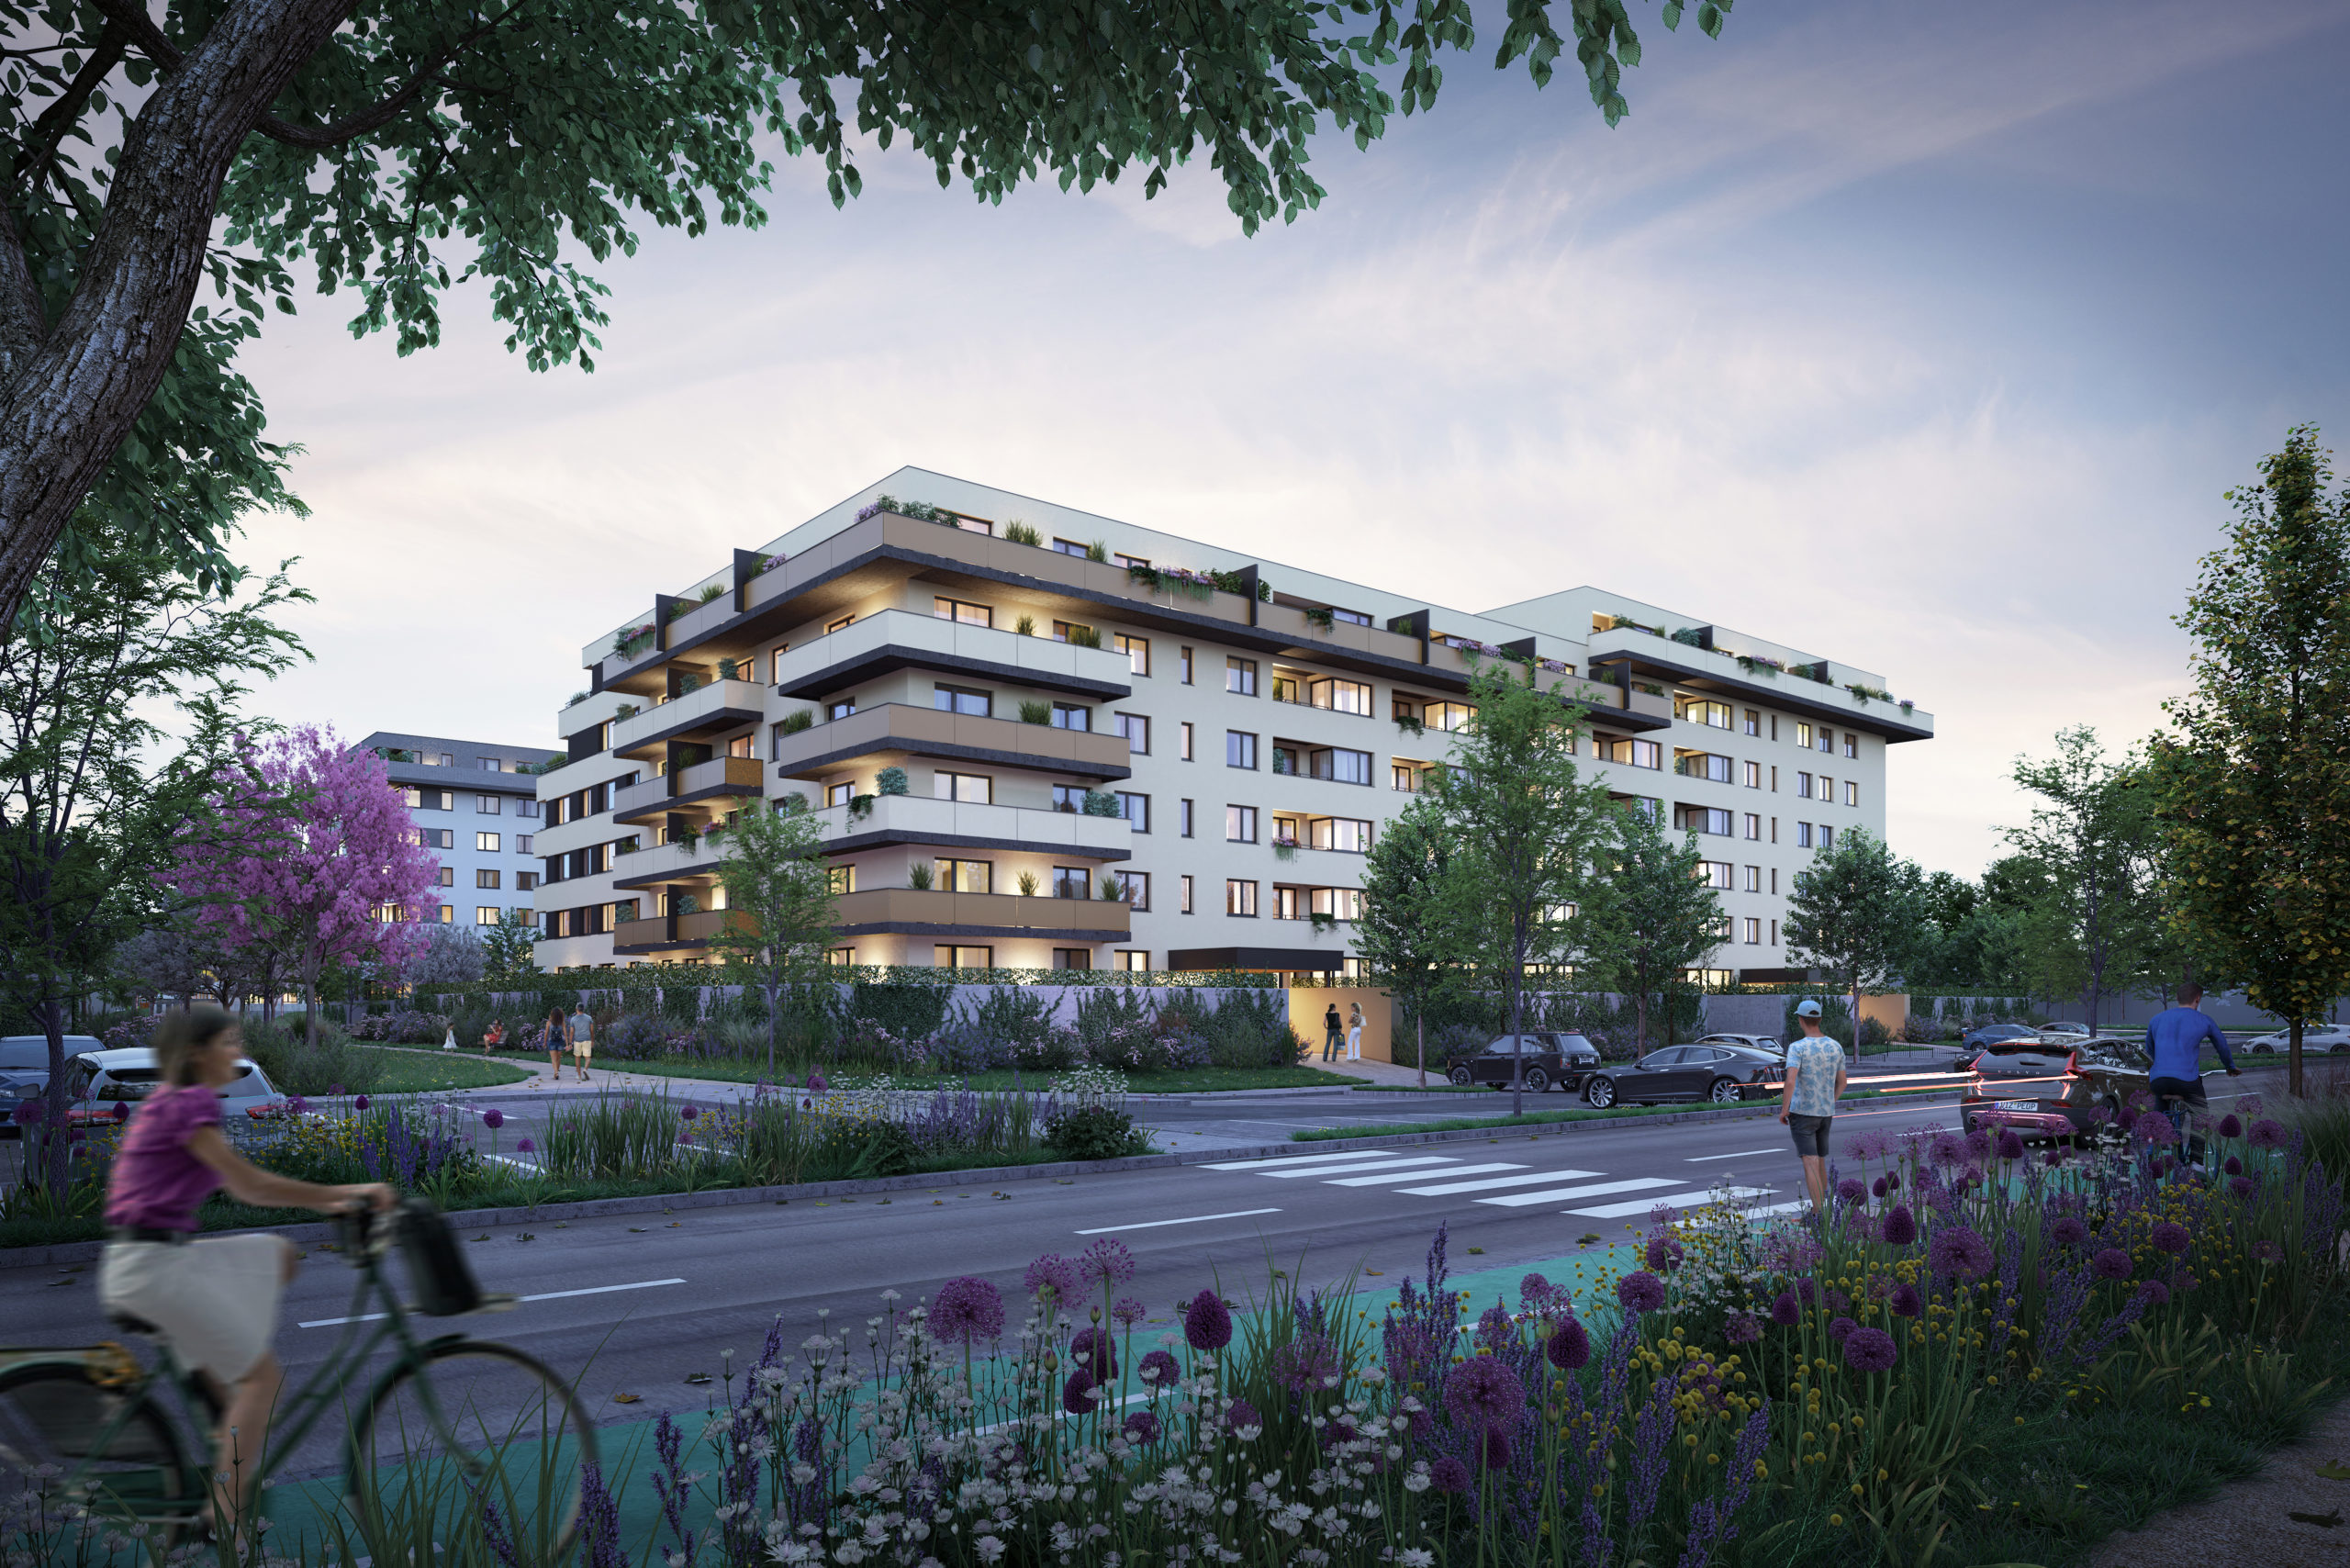 Introducing Lúčna. New Flats in the Arboria Project